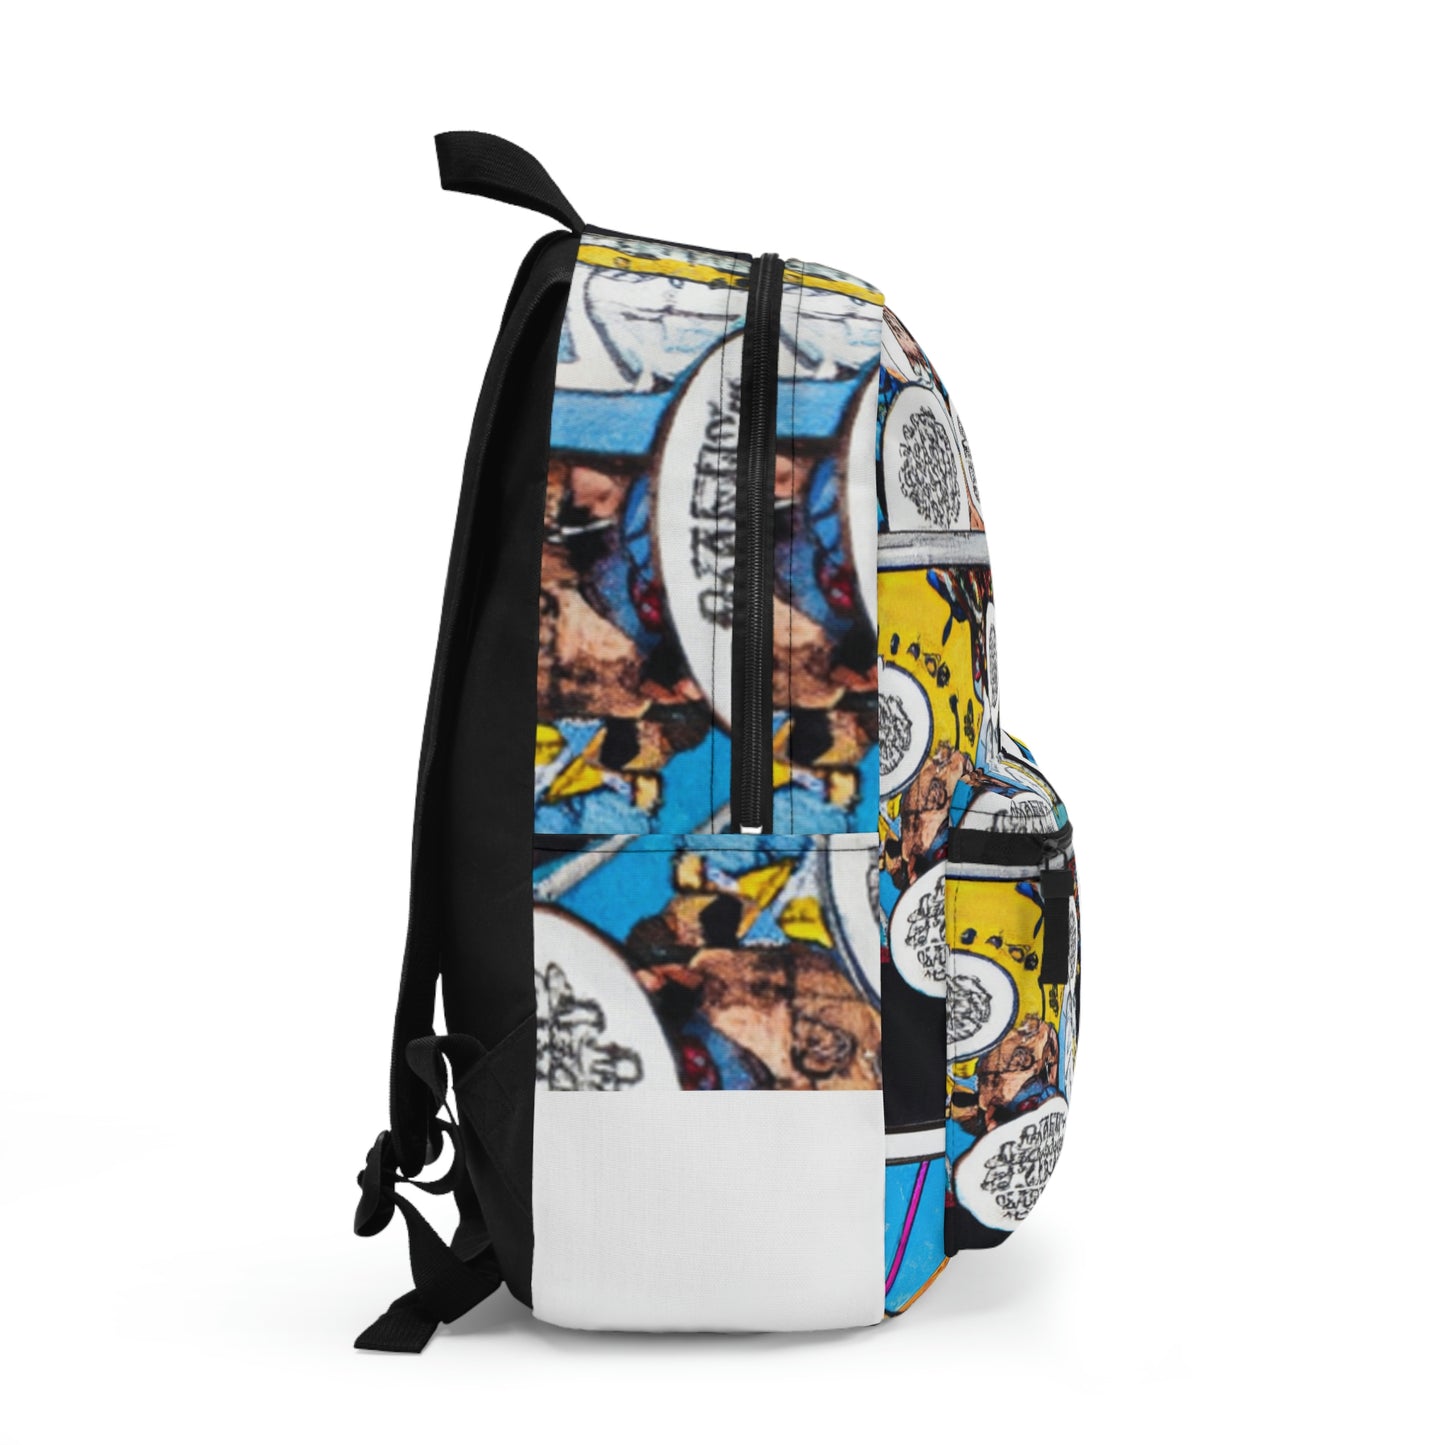 Sparky Boltz - Comic Book Backpack 1 of 1 Collectible